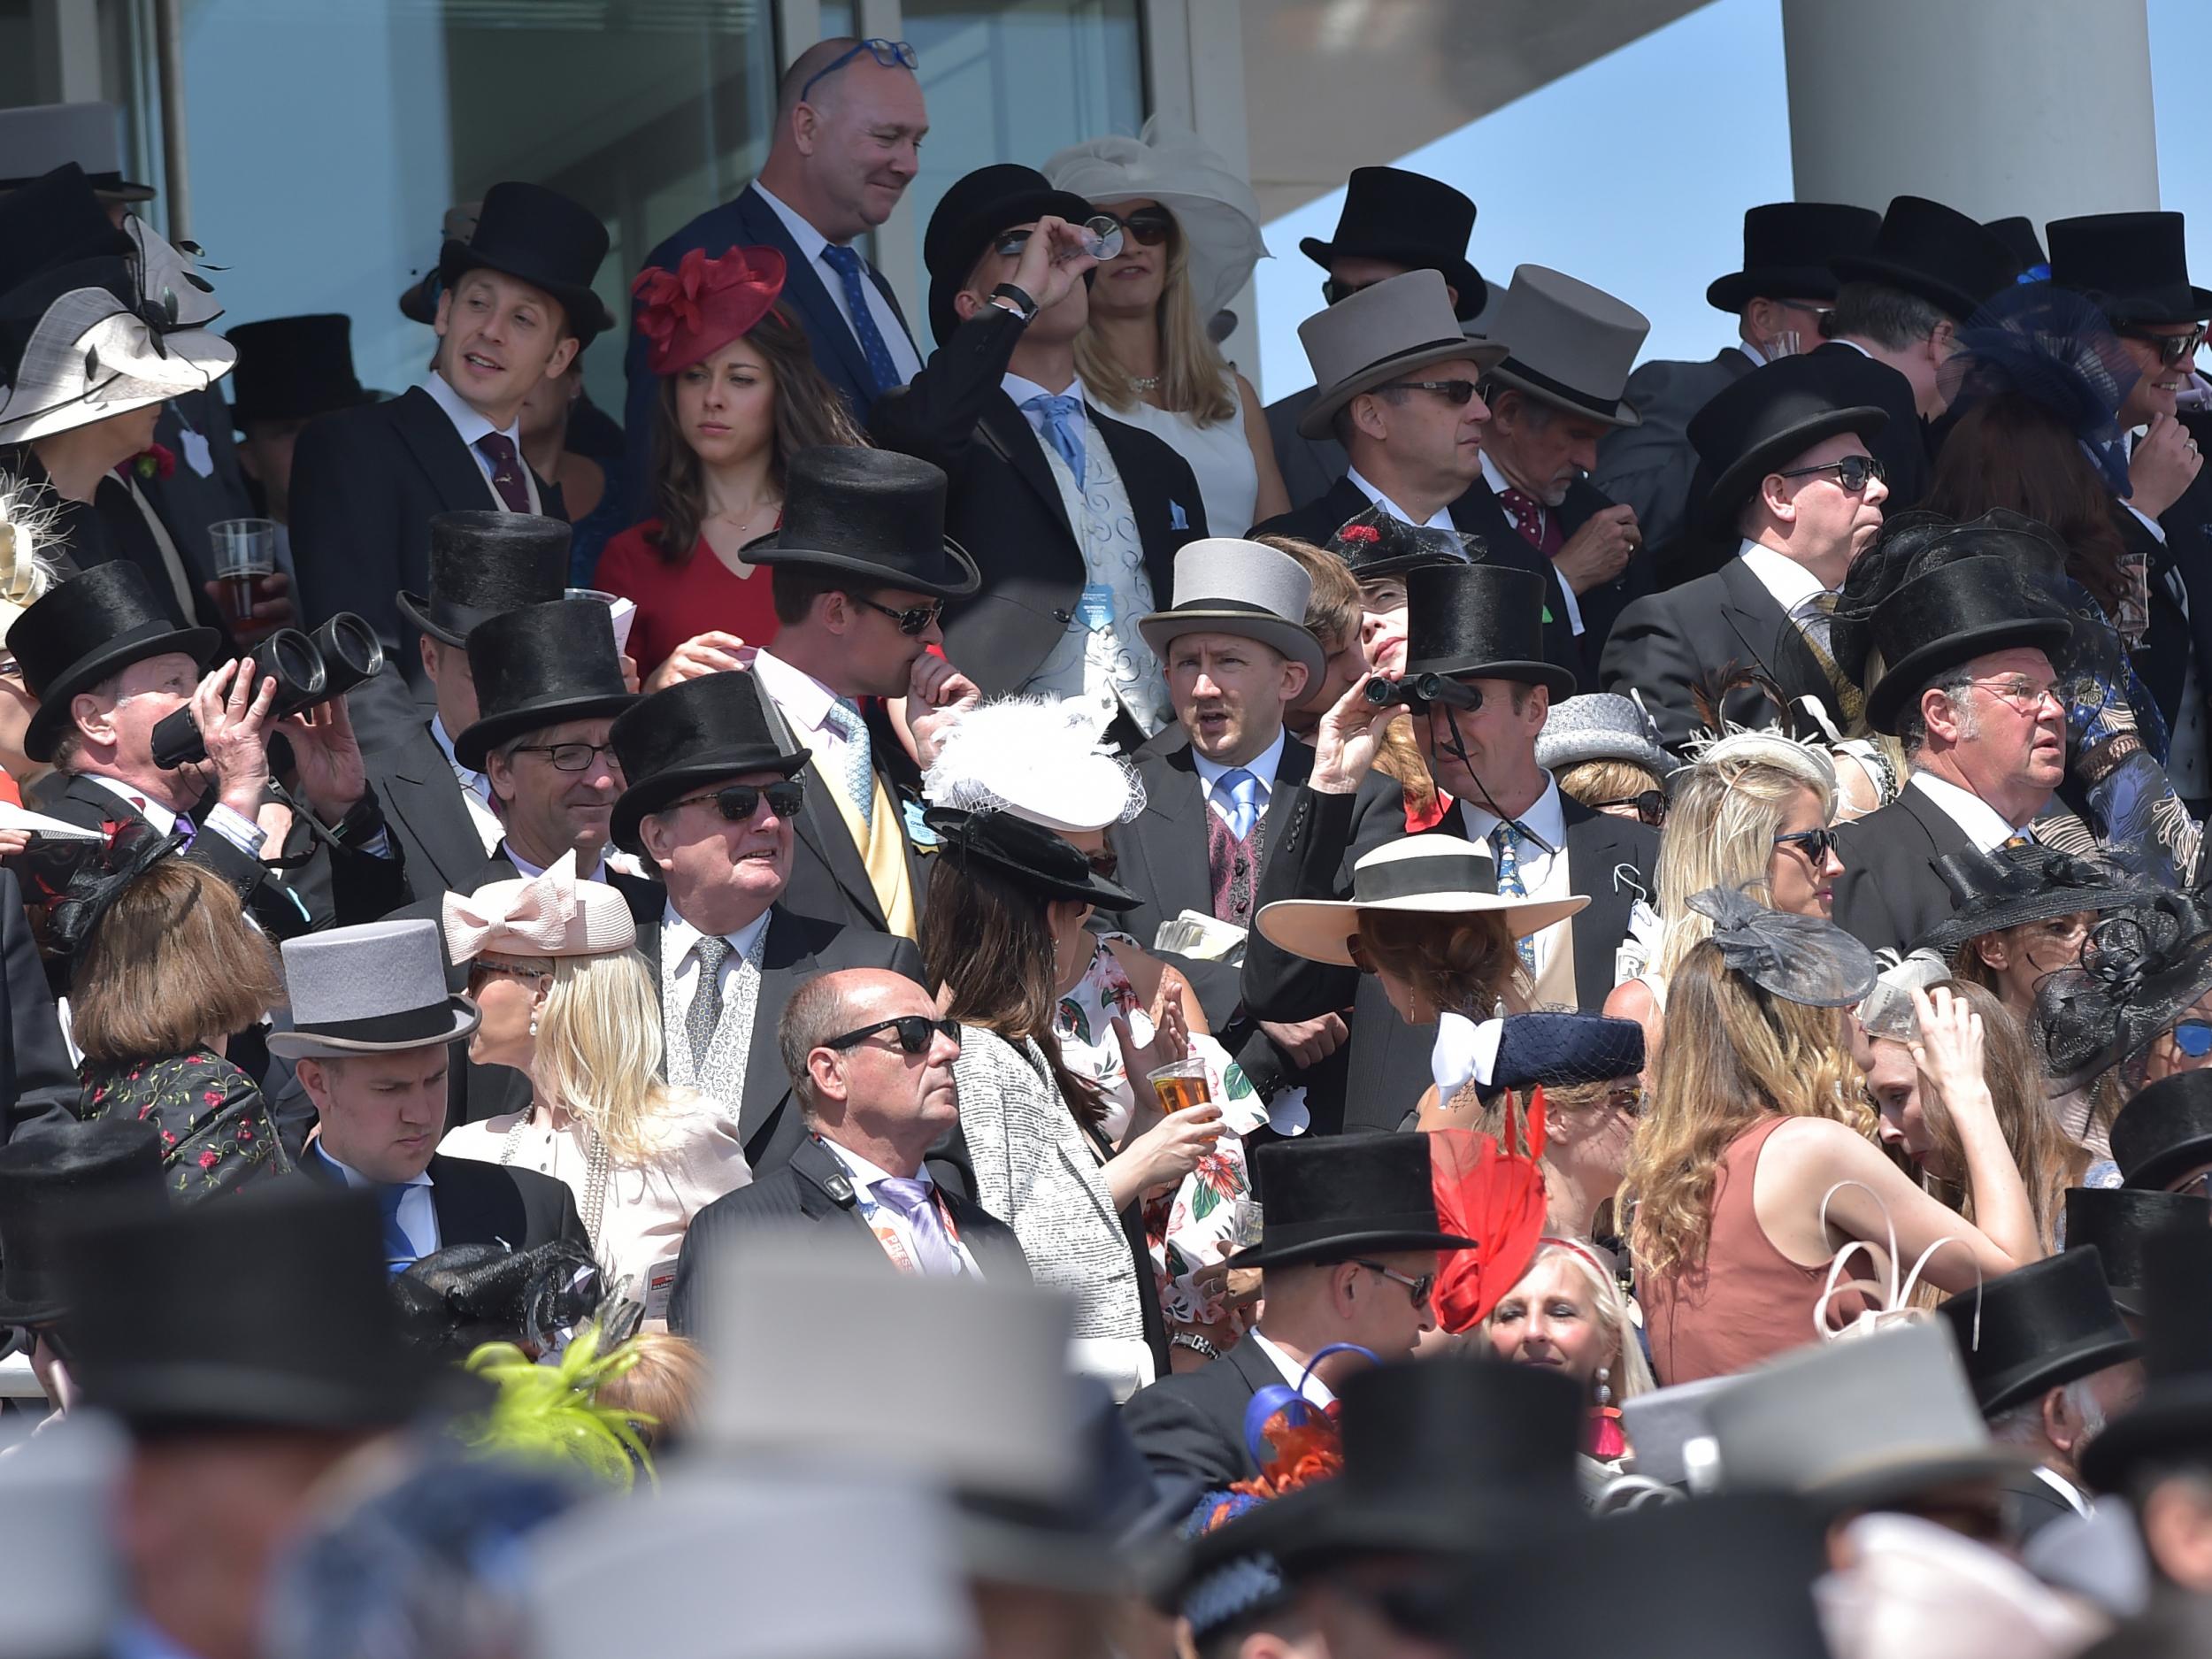 The crowd watching the racing at Epsom Downs on Derby Day 2017